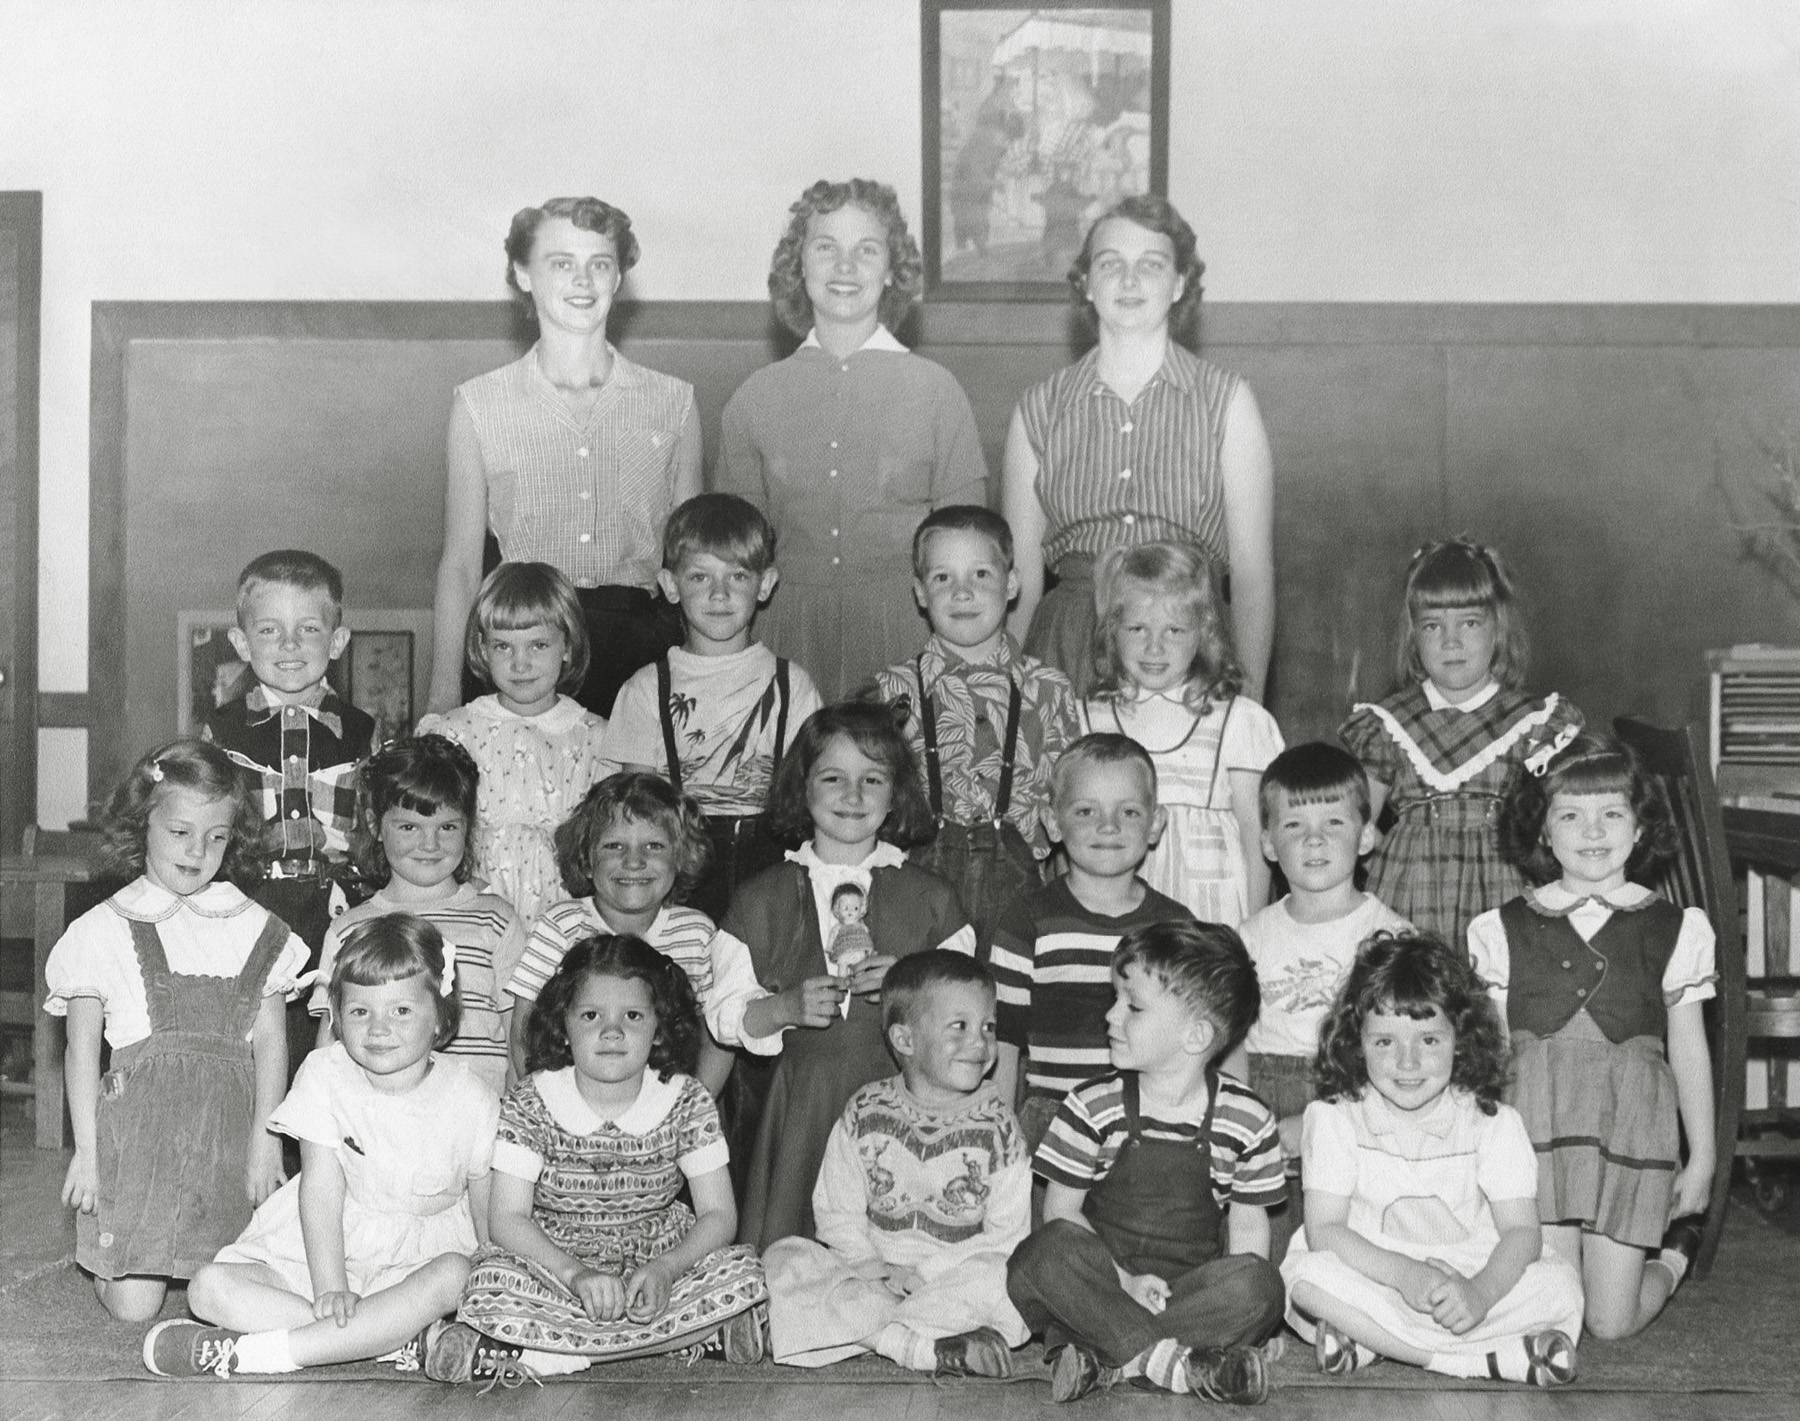 Wisconsin State College, River Falls, Campus School Nursery School class 1952. Yours truly (bohneyjames) far left third row. The teacher next to me, Peg Wells, still resides in River Falls. Classmates' names available on request -- (of course, my Mom wrote them on the back). View full size.